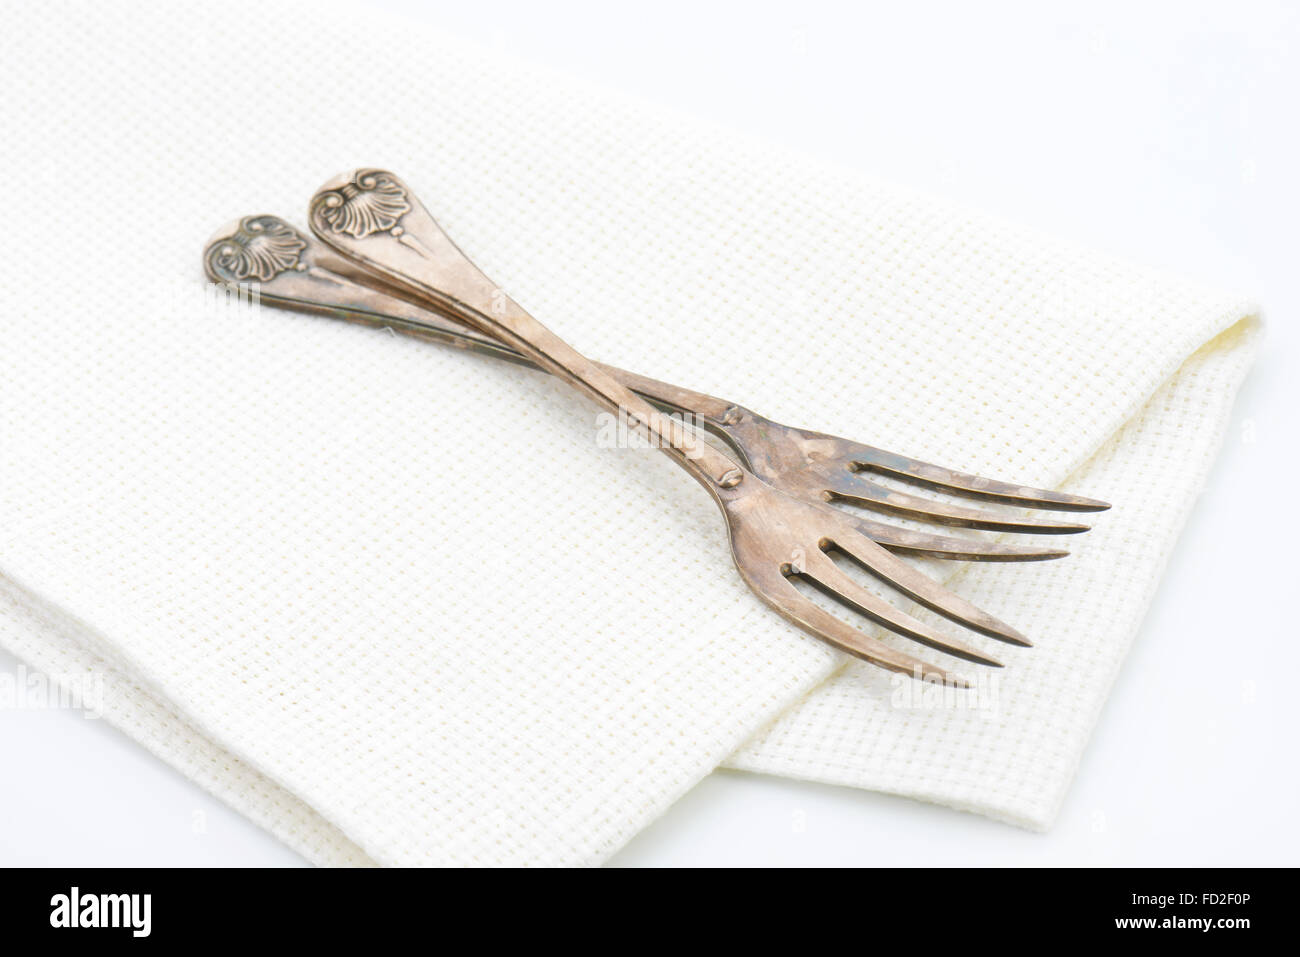 Vintage ornate forks with three tines Stock Photo